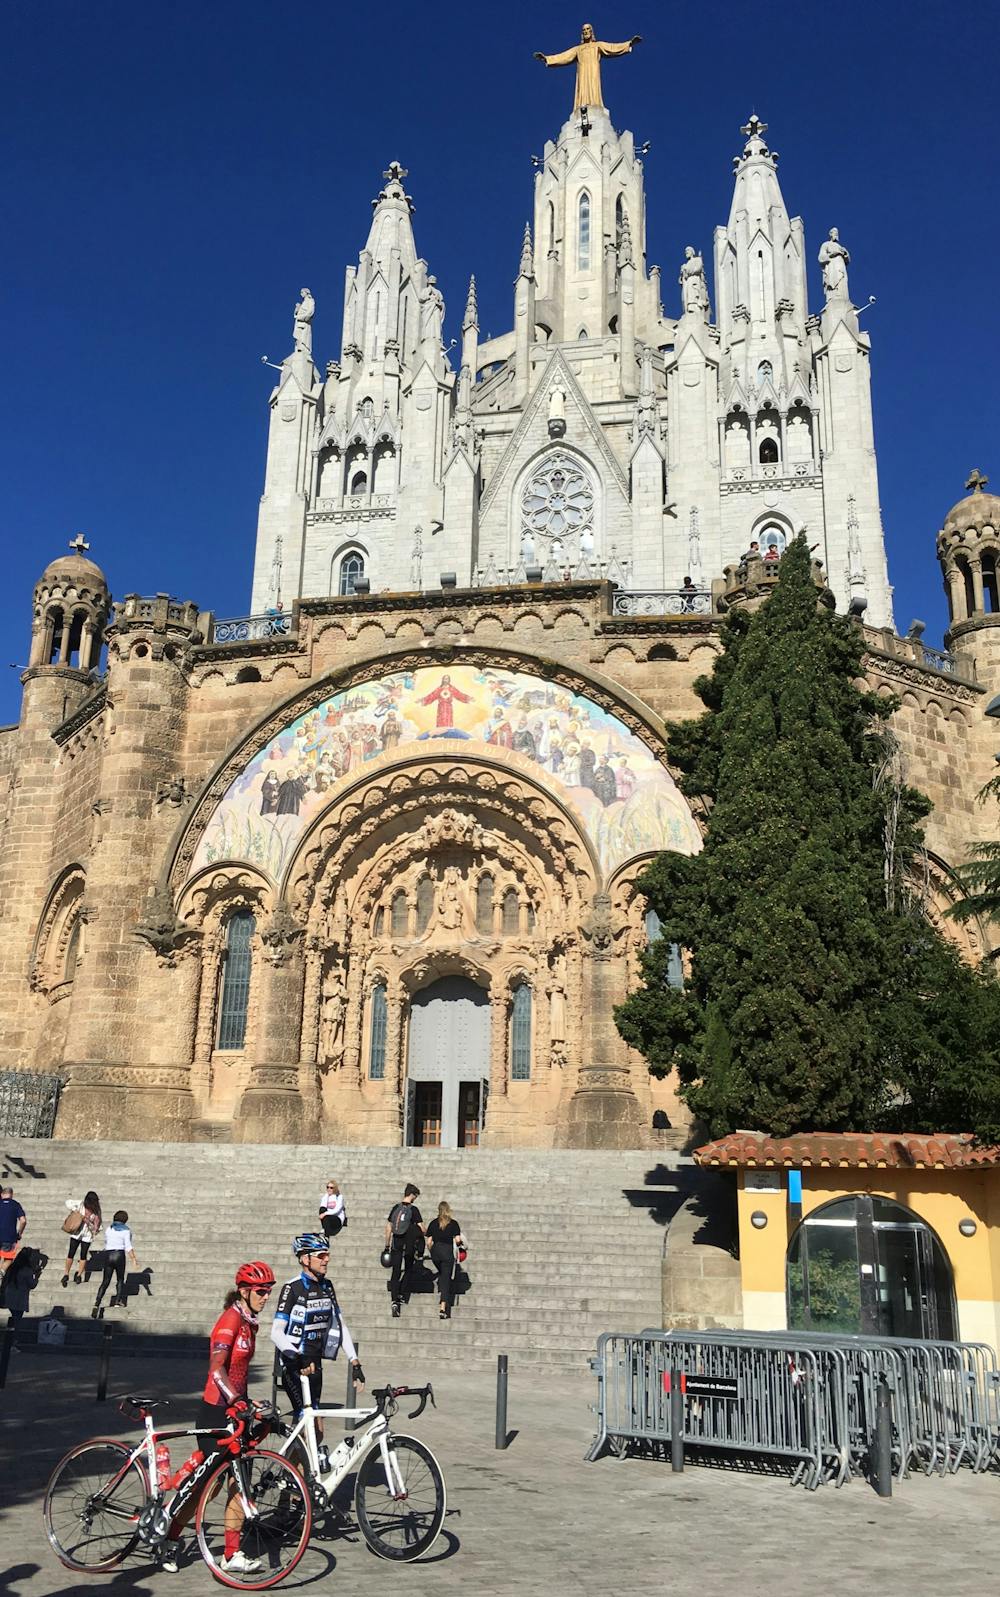 This route passes by El Tibidabo